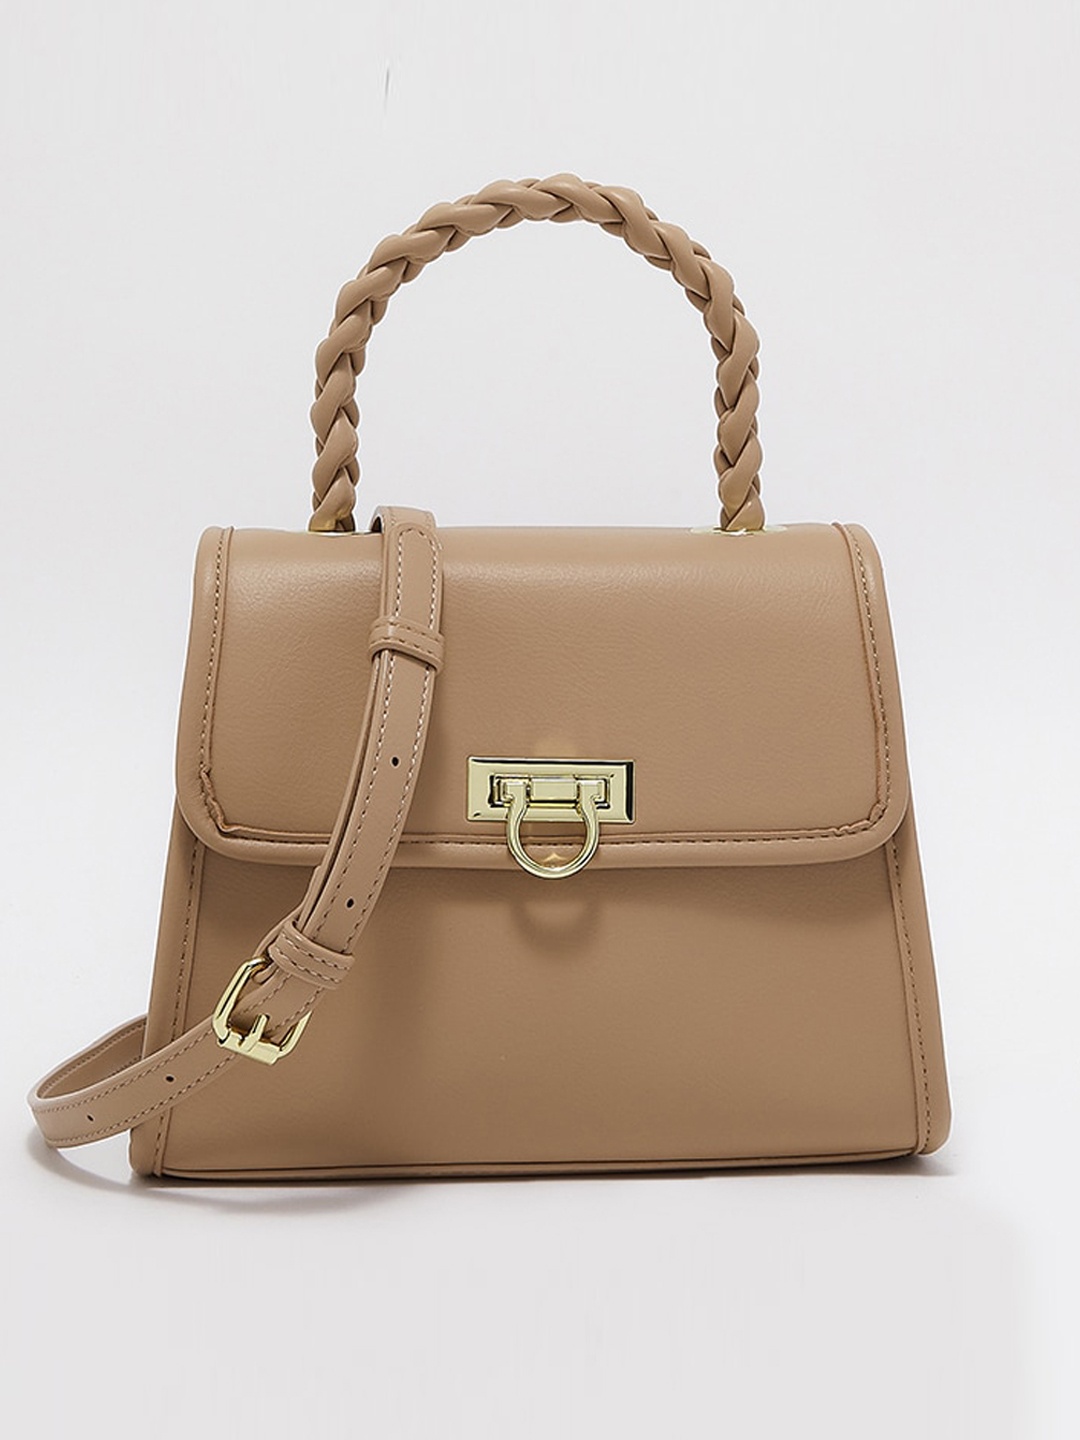 

Beverly Hills Polo Club PU Structured Satchel Bag, Brown